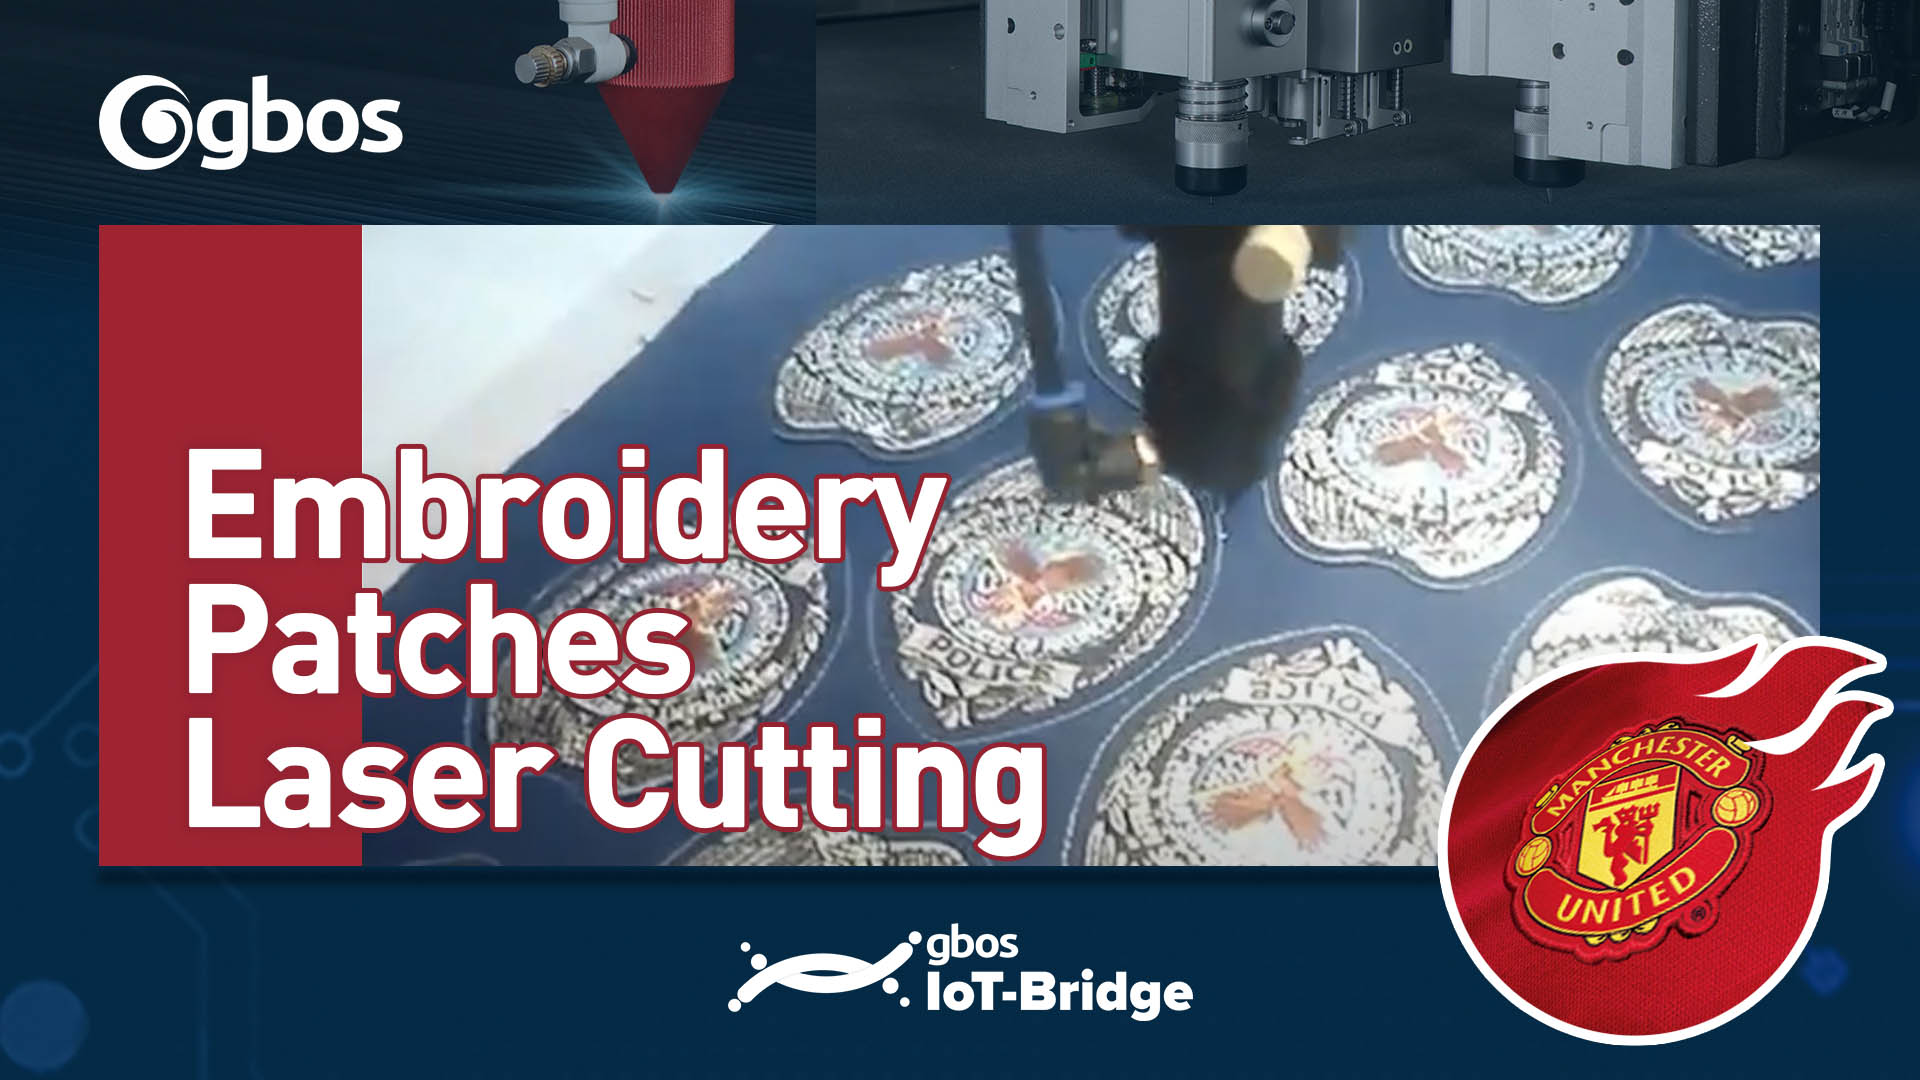 Emboridery Patches Laser Cutting